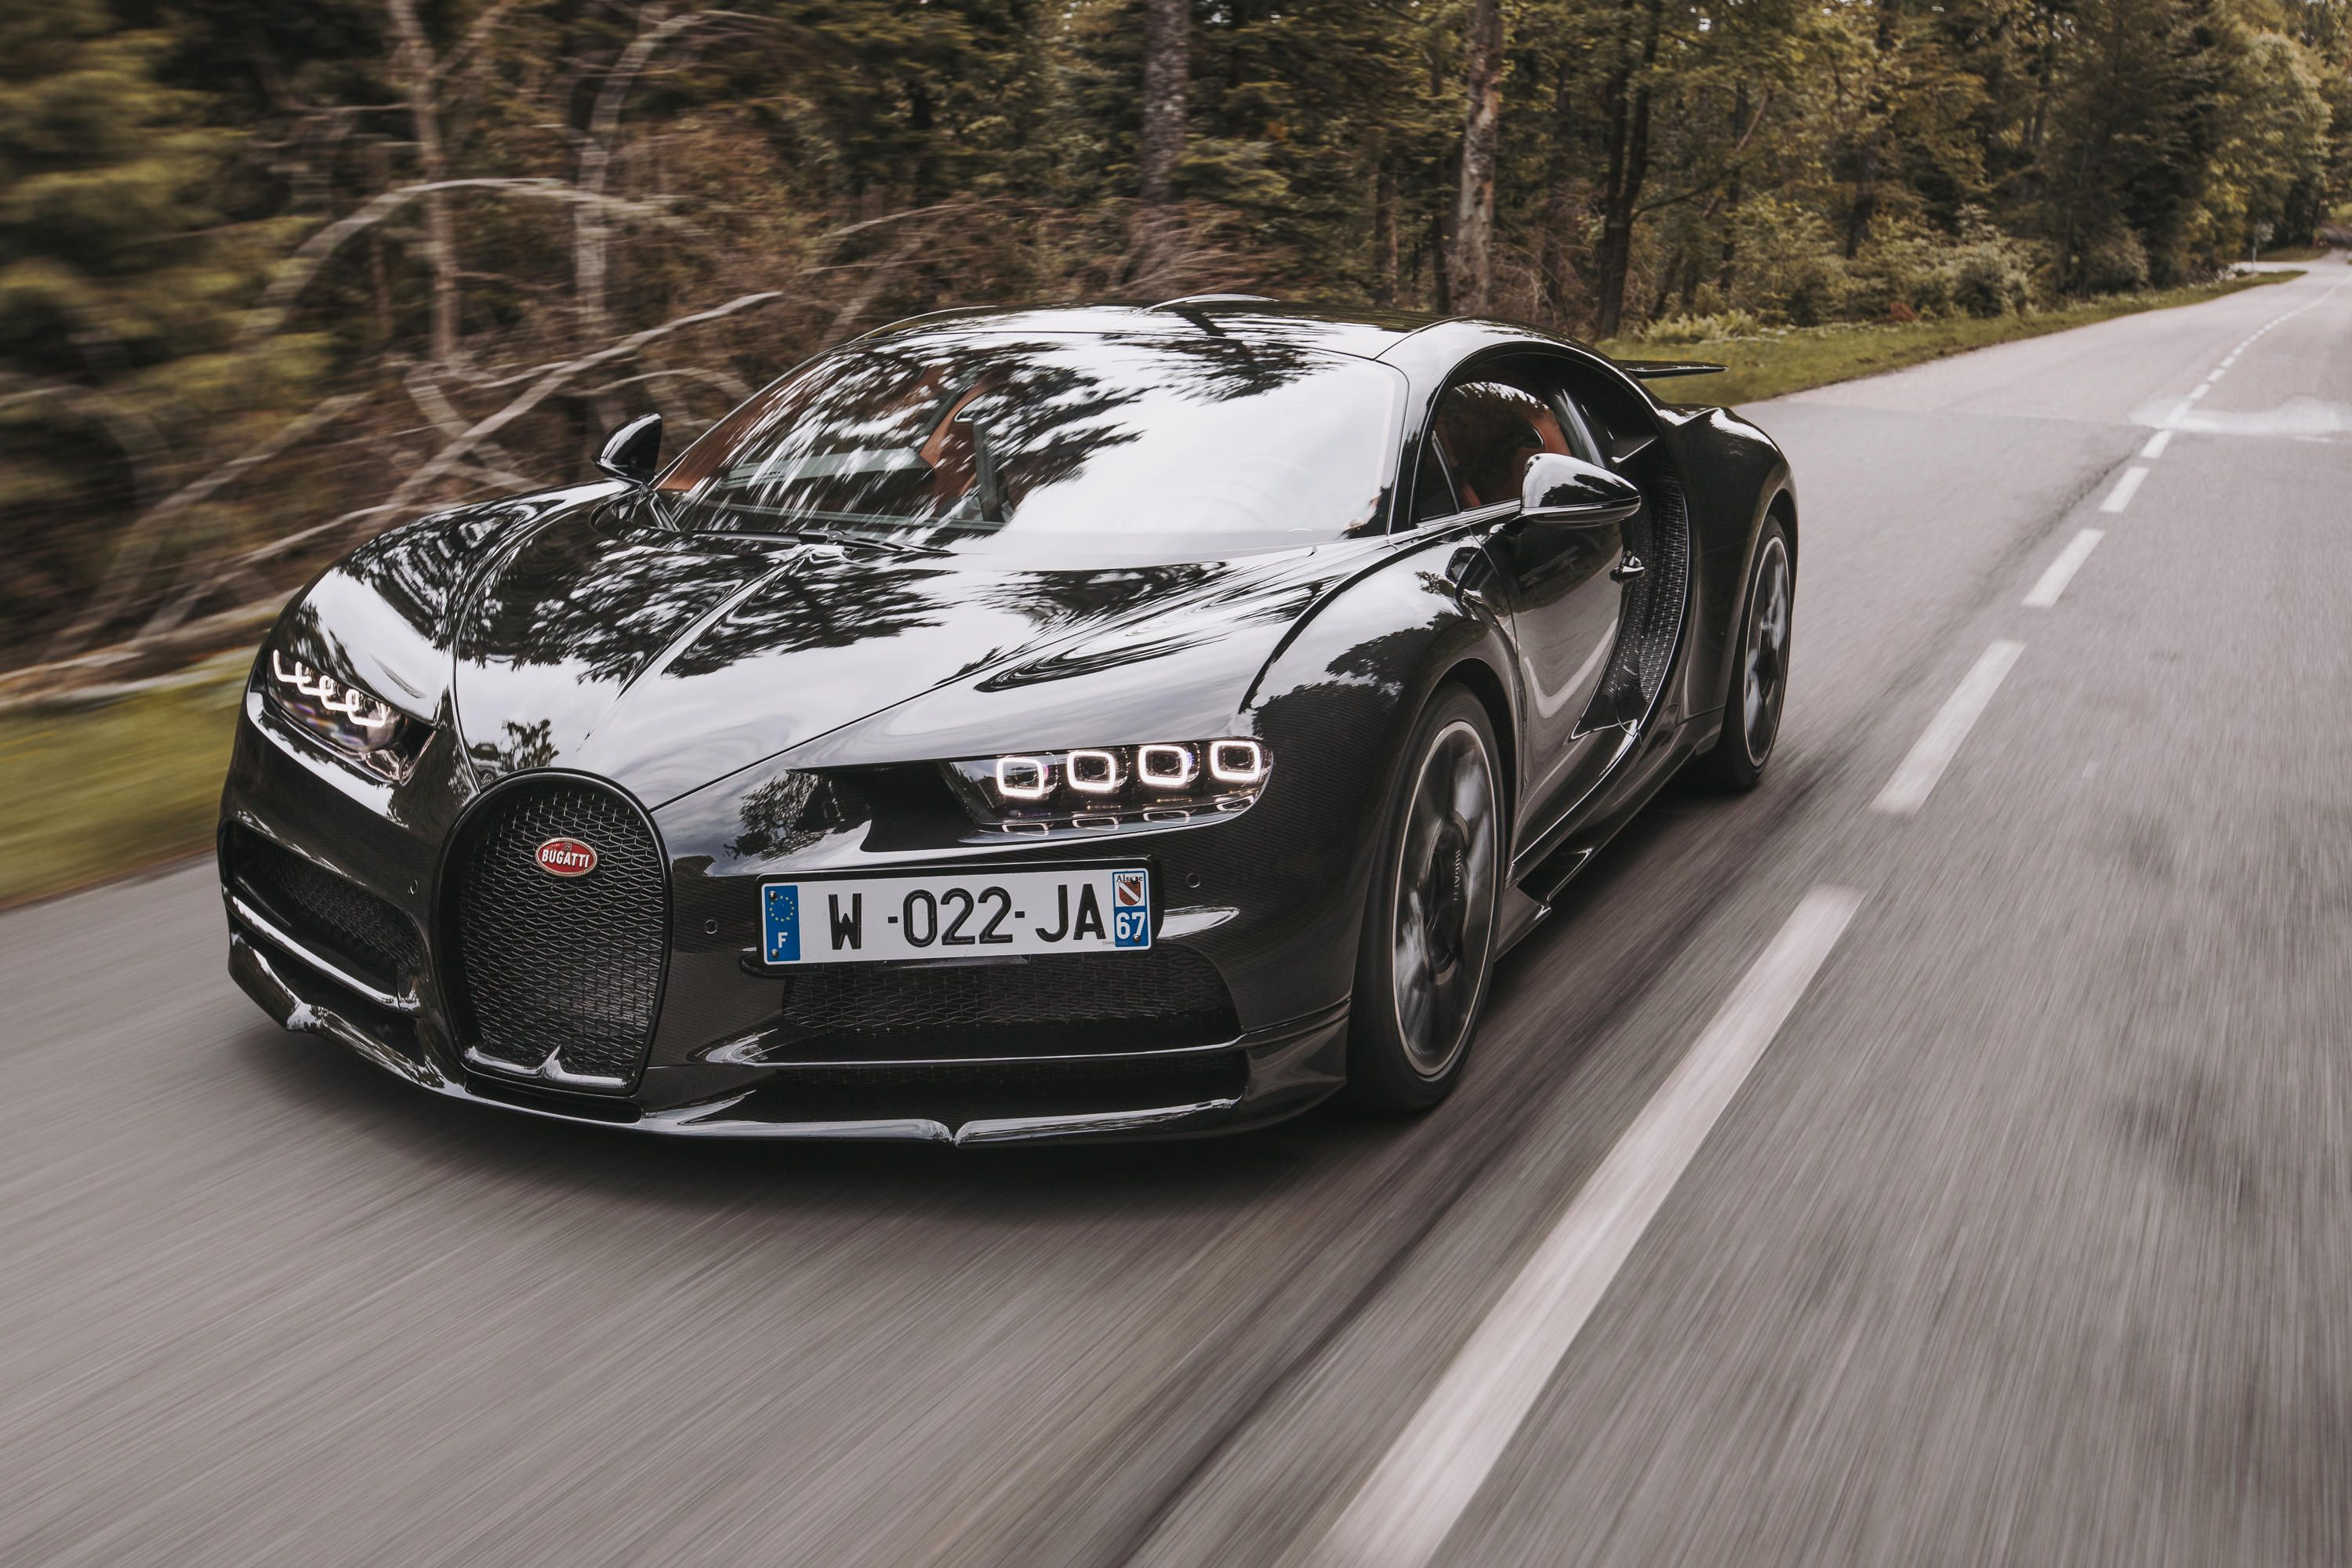 Ausmalbilder Bugatti Chiron
 Find out what the Bugatti Chiron is like to really drive